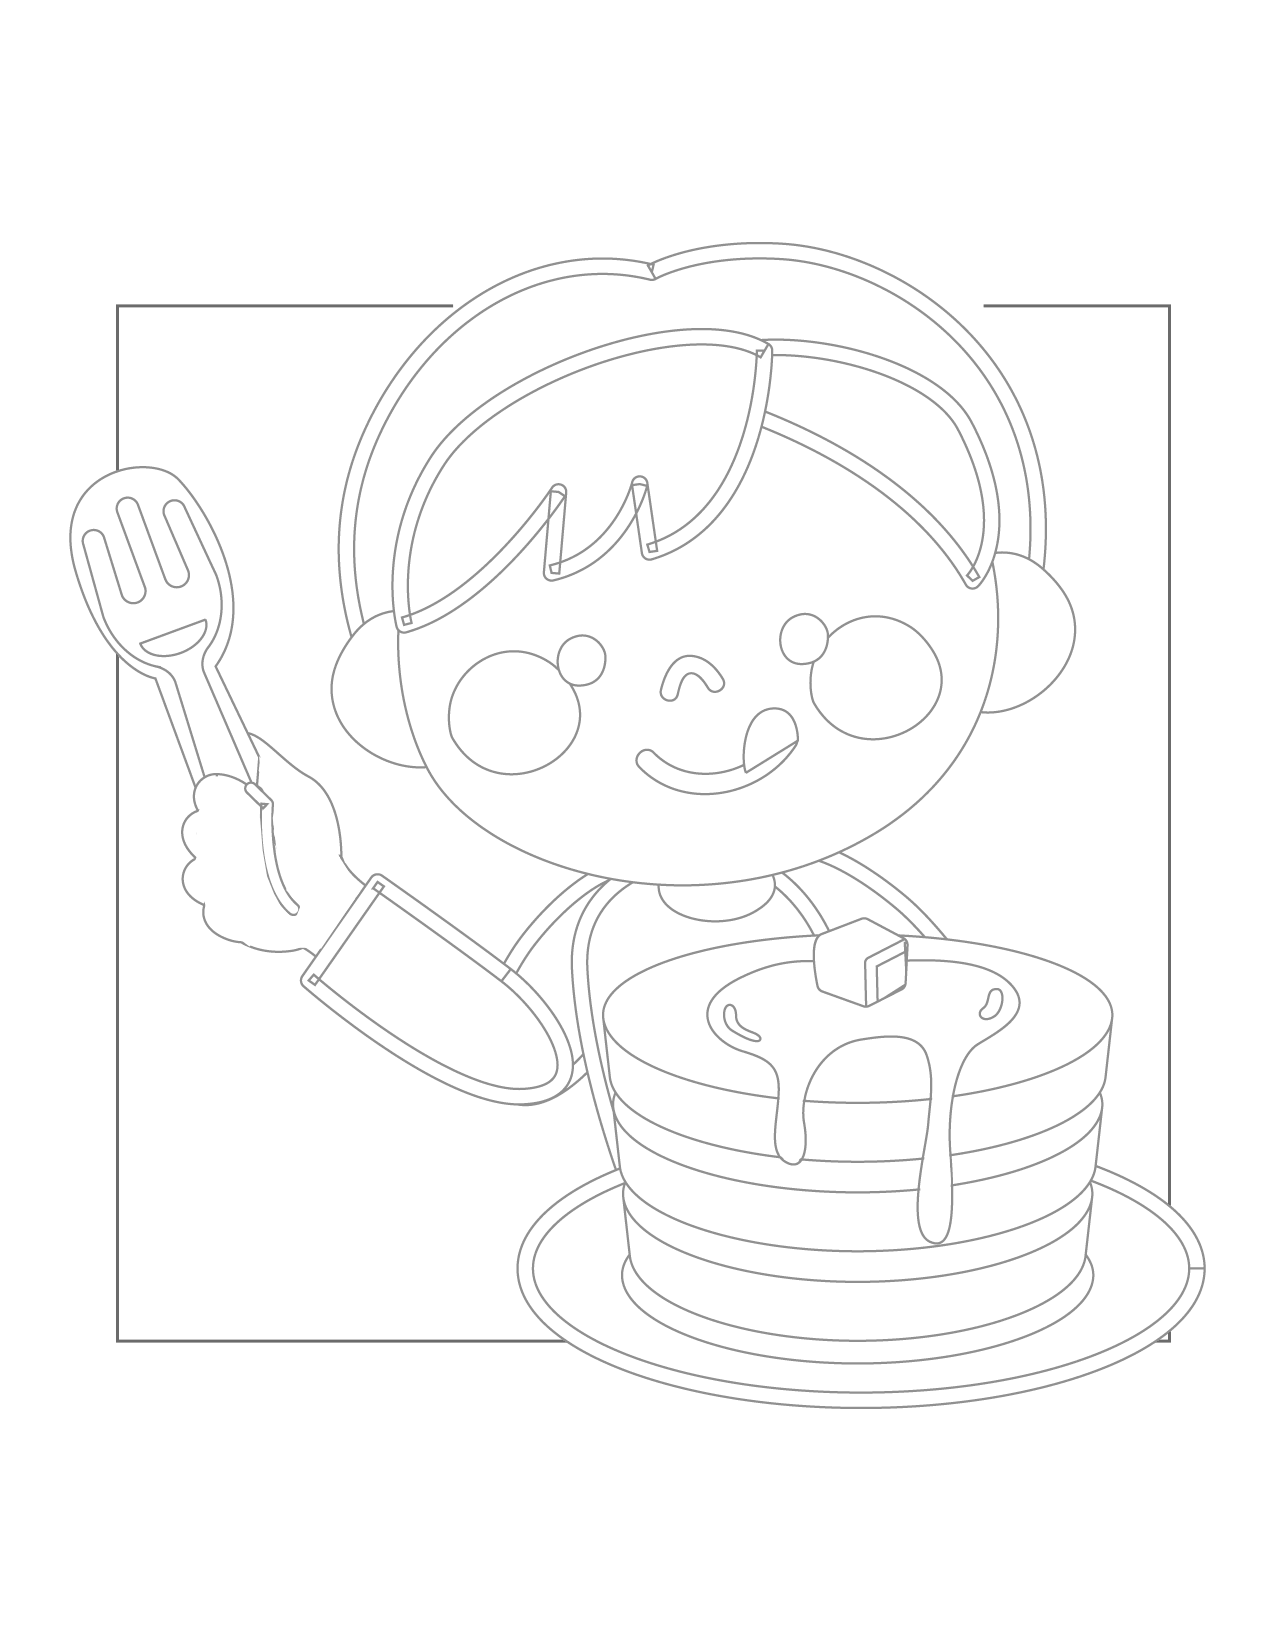 Boy With A Stack Of Pancakes Coloring Page